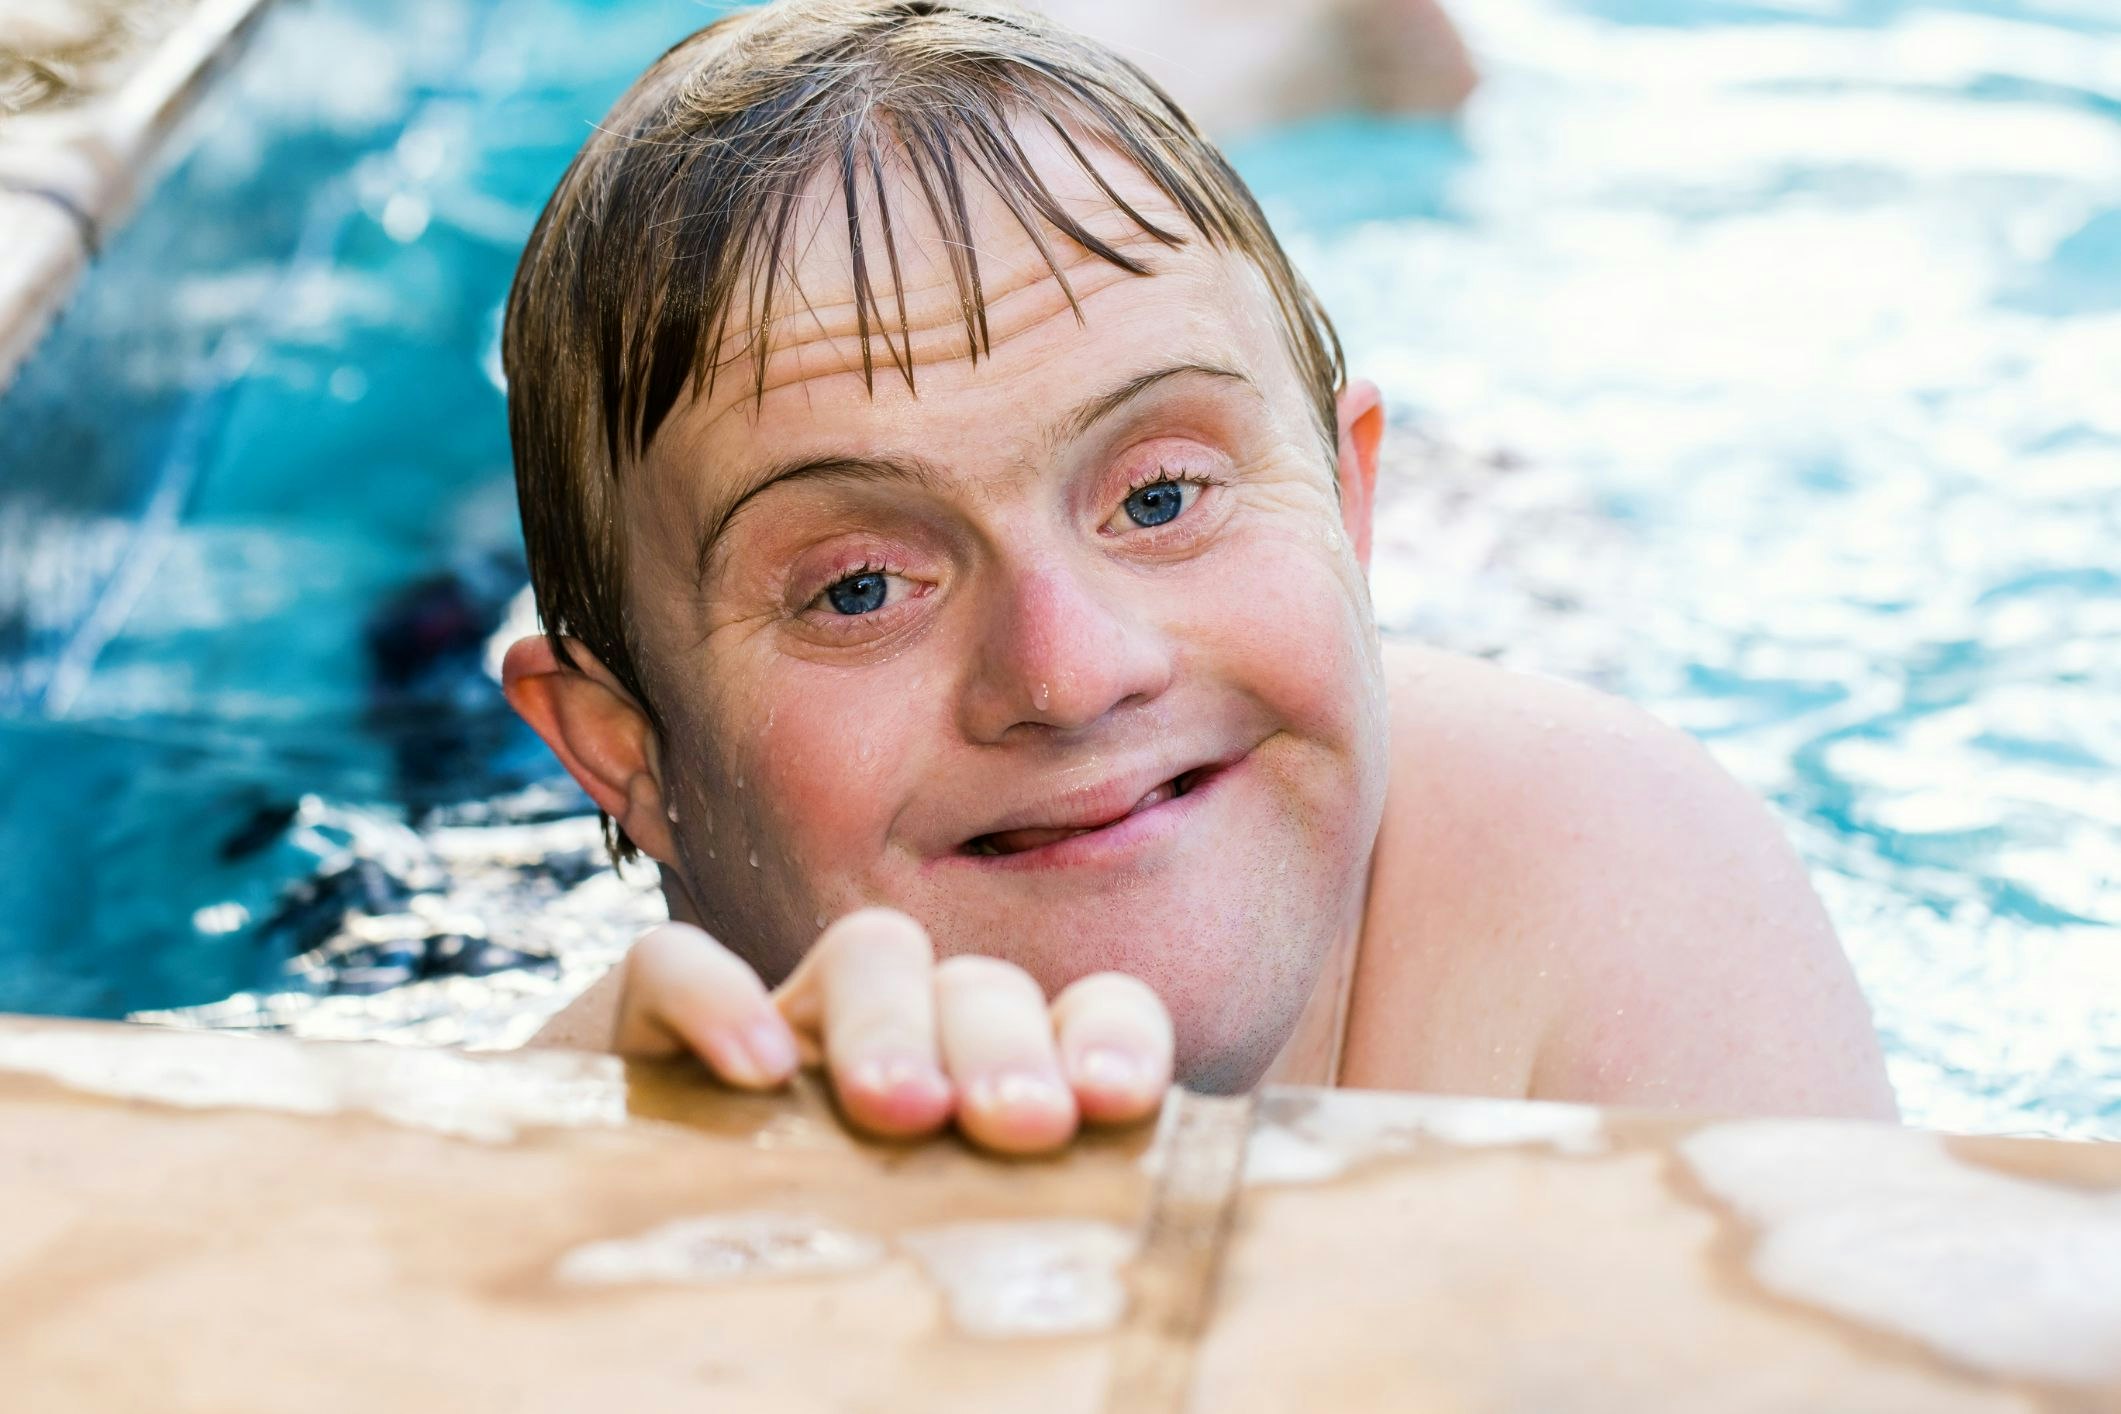 <p>Special Olympics Australia has raised more funds through the SPLASH swimming event held recently. [Source: Shuttershock]</p>
